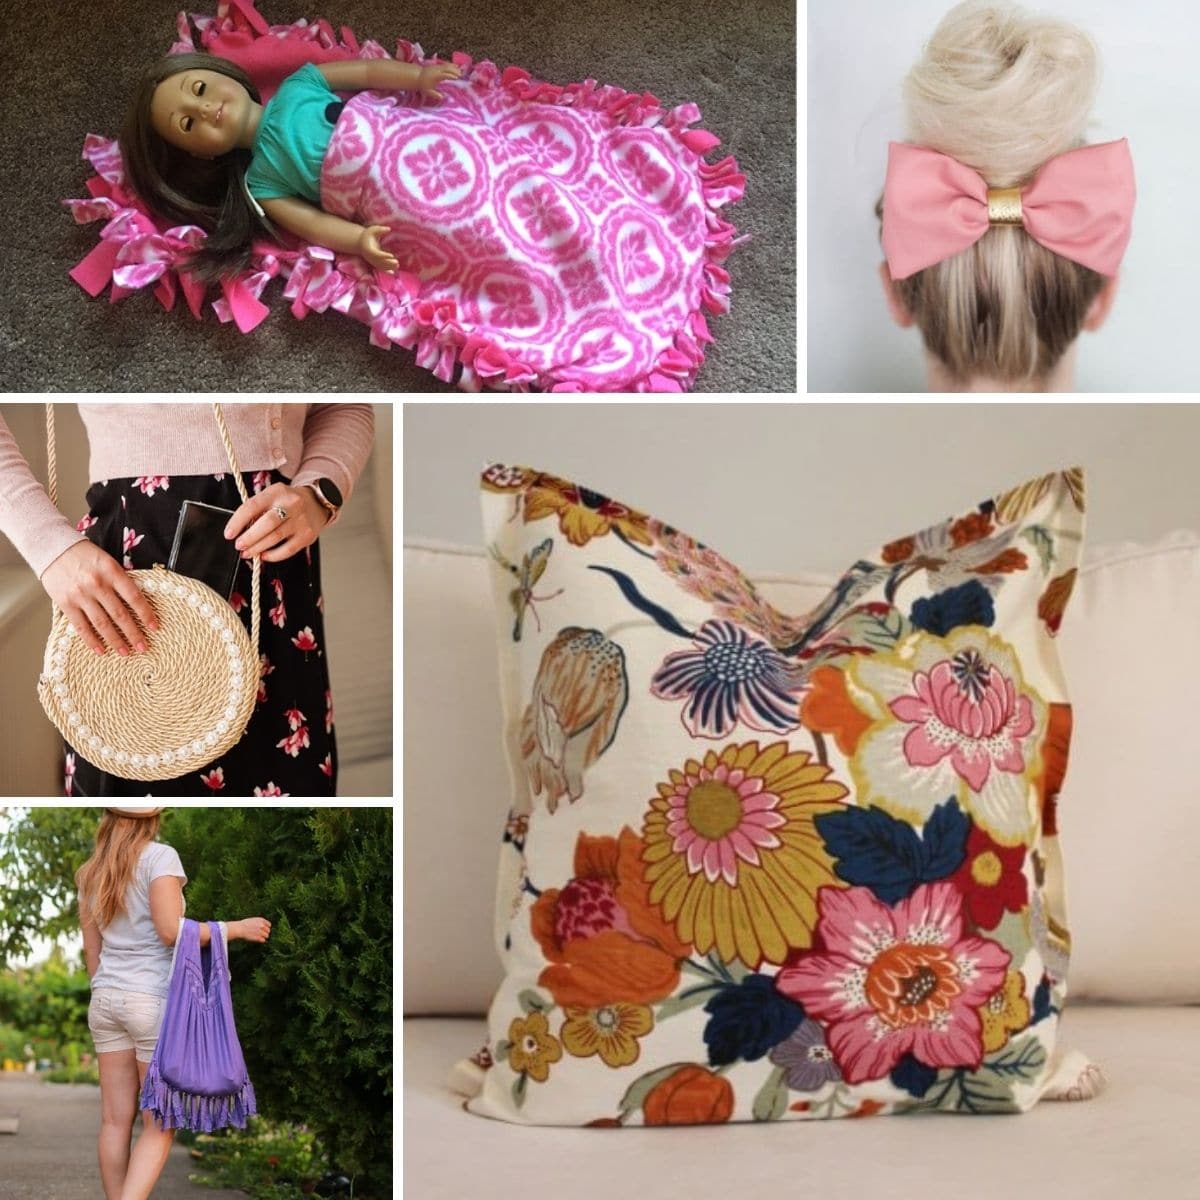 35+ Extremely Creative No-Sew DIY Projects - DIY & Crafts